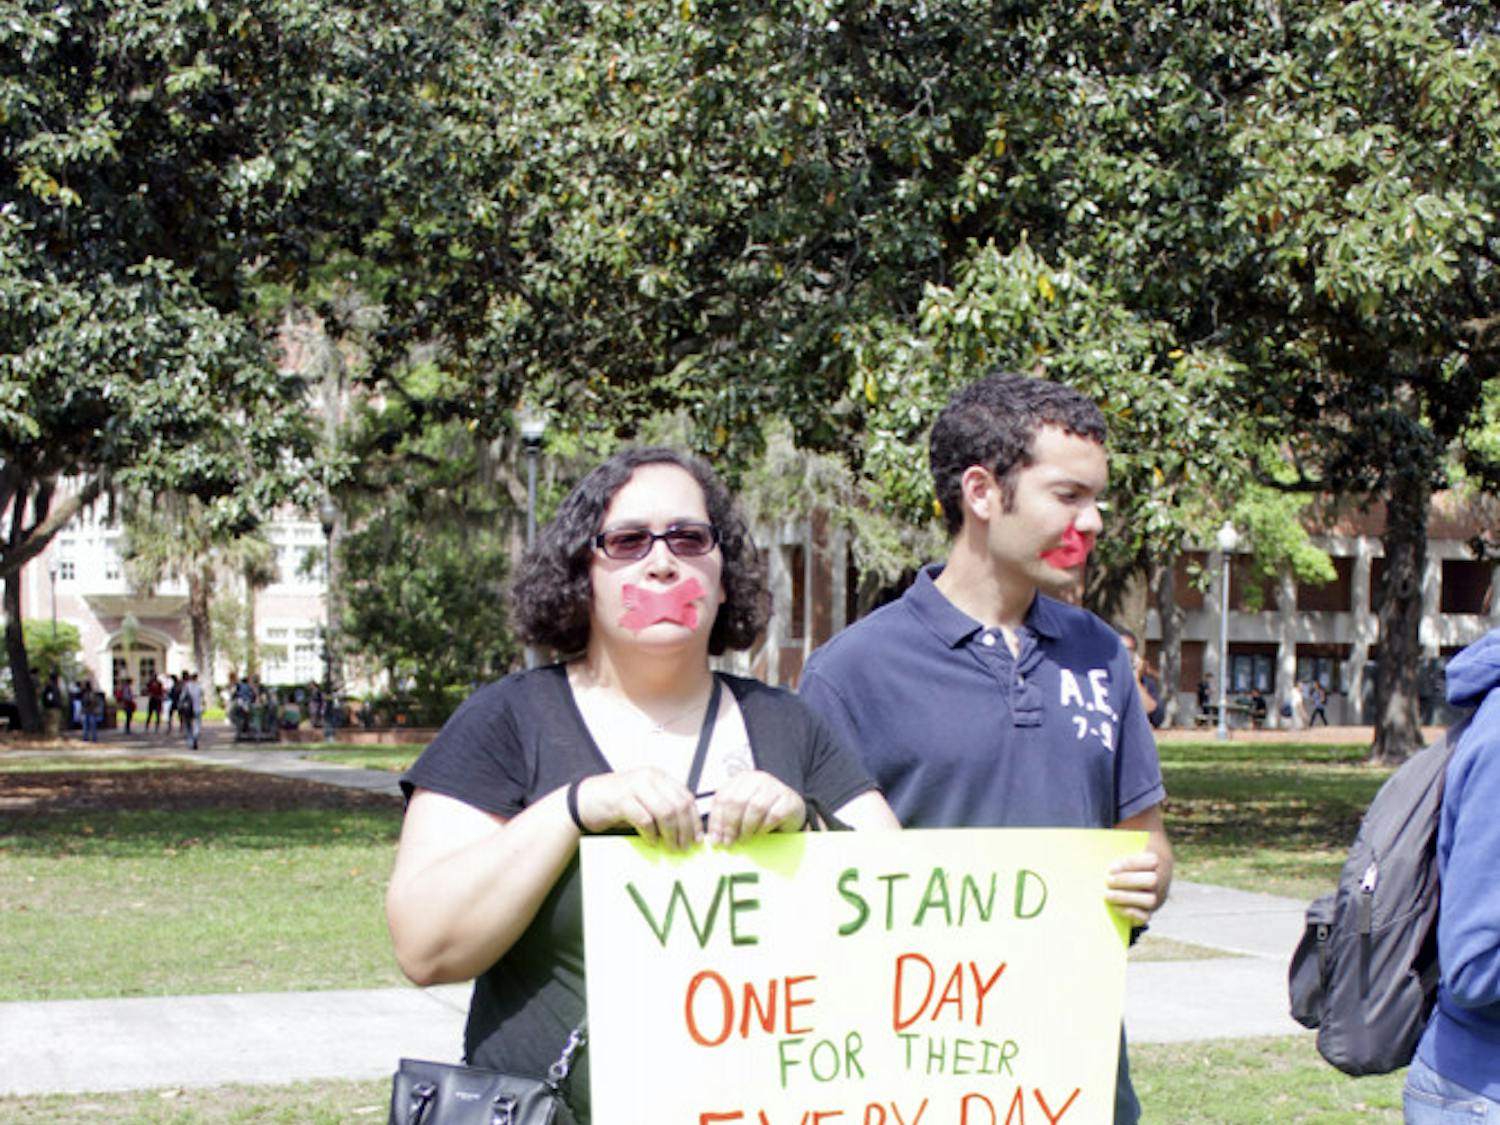 Trish Kearney, a 43-year-old UF health education and behavior junior, and Jonathan Batista, a 23-year-old UF chemical engineering senior, stand on Plaza of the Americas on Tuesday. They and four other students marched between there and Turlington Plaza with their mouths taped and hands tied to highlight human trafficking.